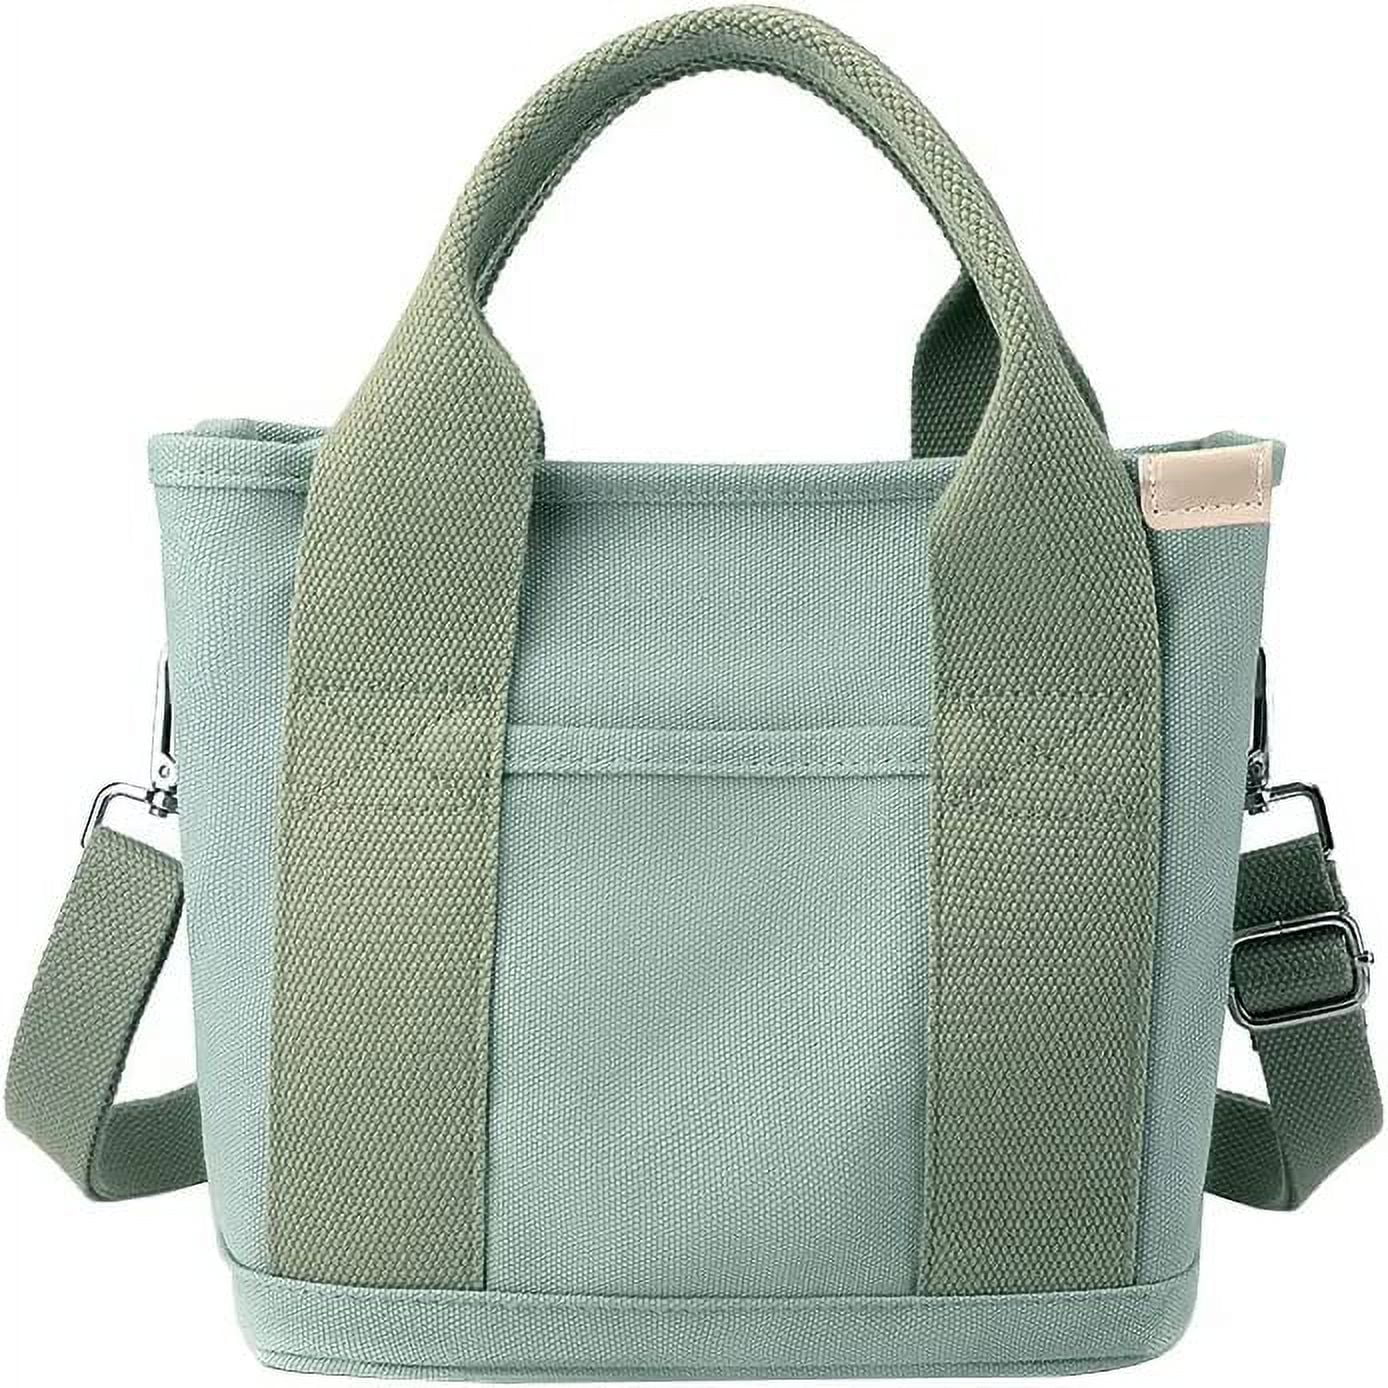 Simple Modern Tote Bag for Women | Work Laptop Tote Bags | Shoulder Bag with Crossbody Strap and Pockets Water-Resistant | 22 Olive